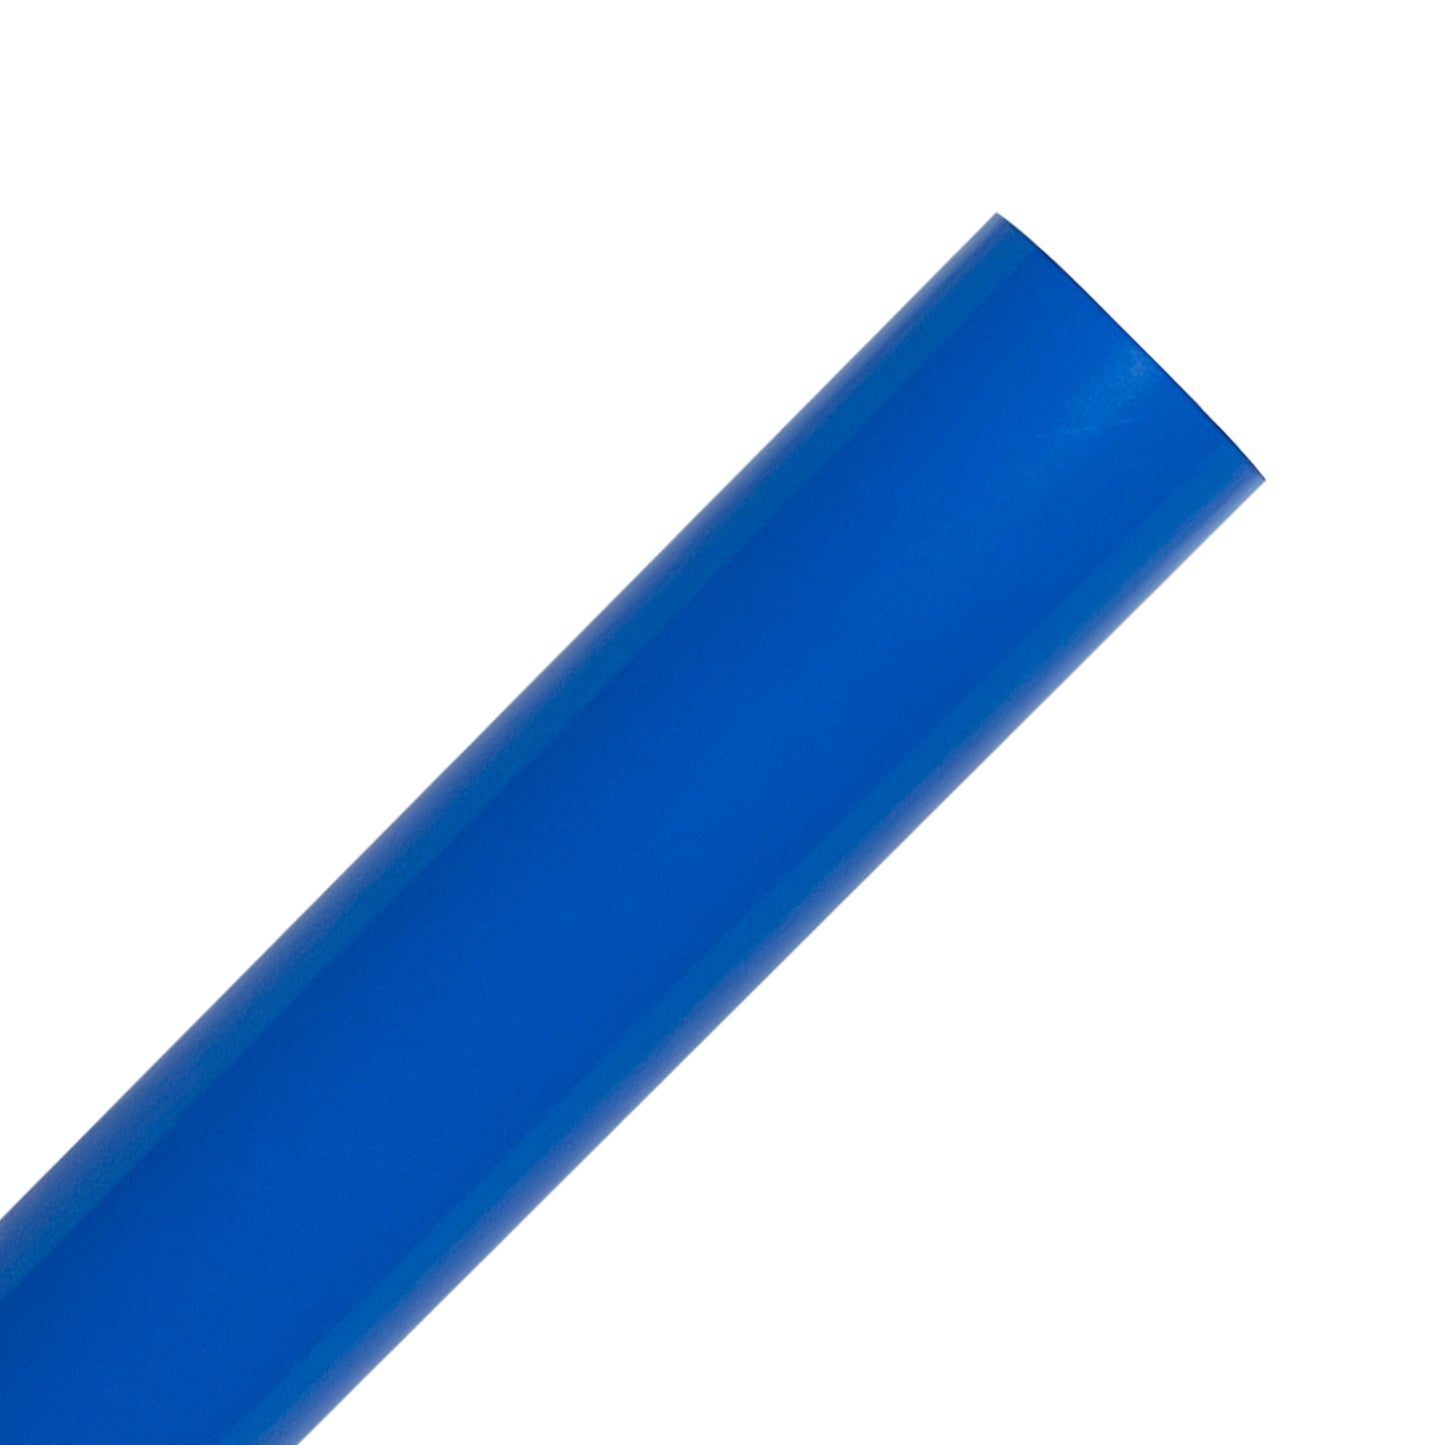 Blue Adhesive Vinyl Rolls By Craftables